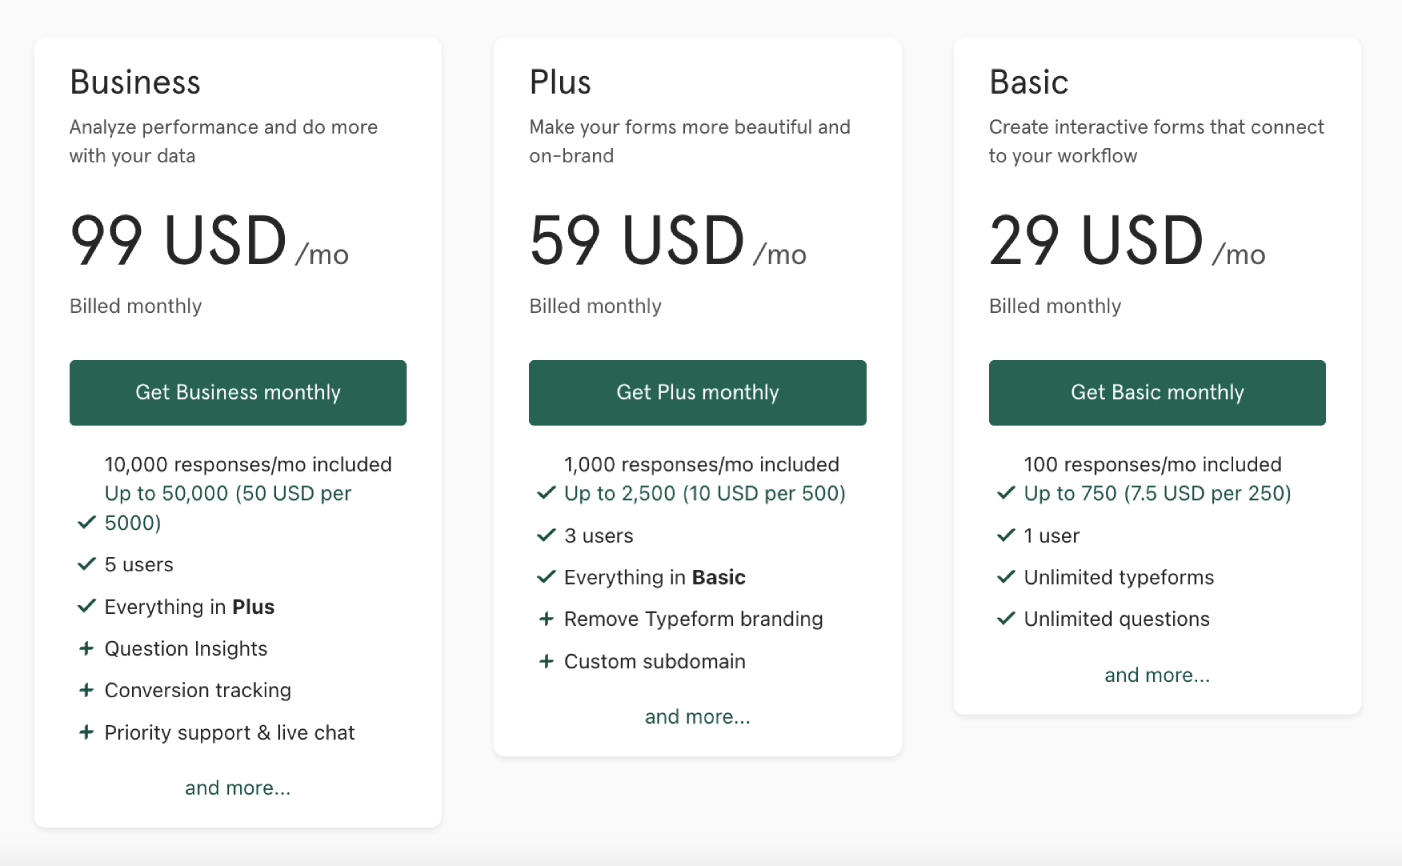 Typeform pricing plans are expensive